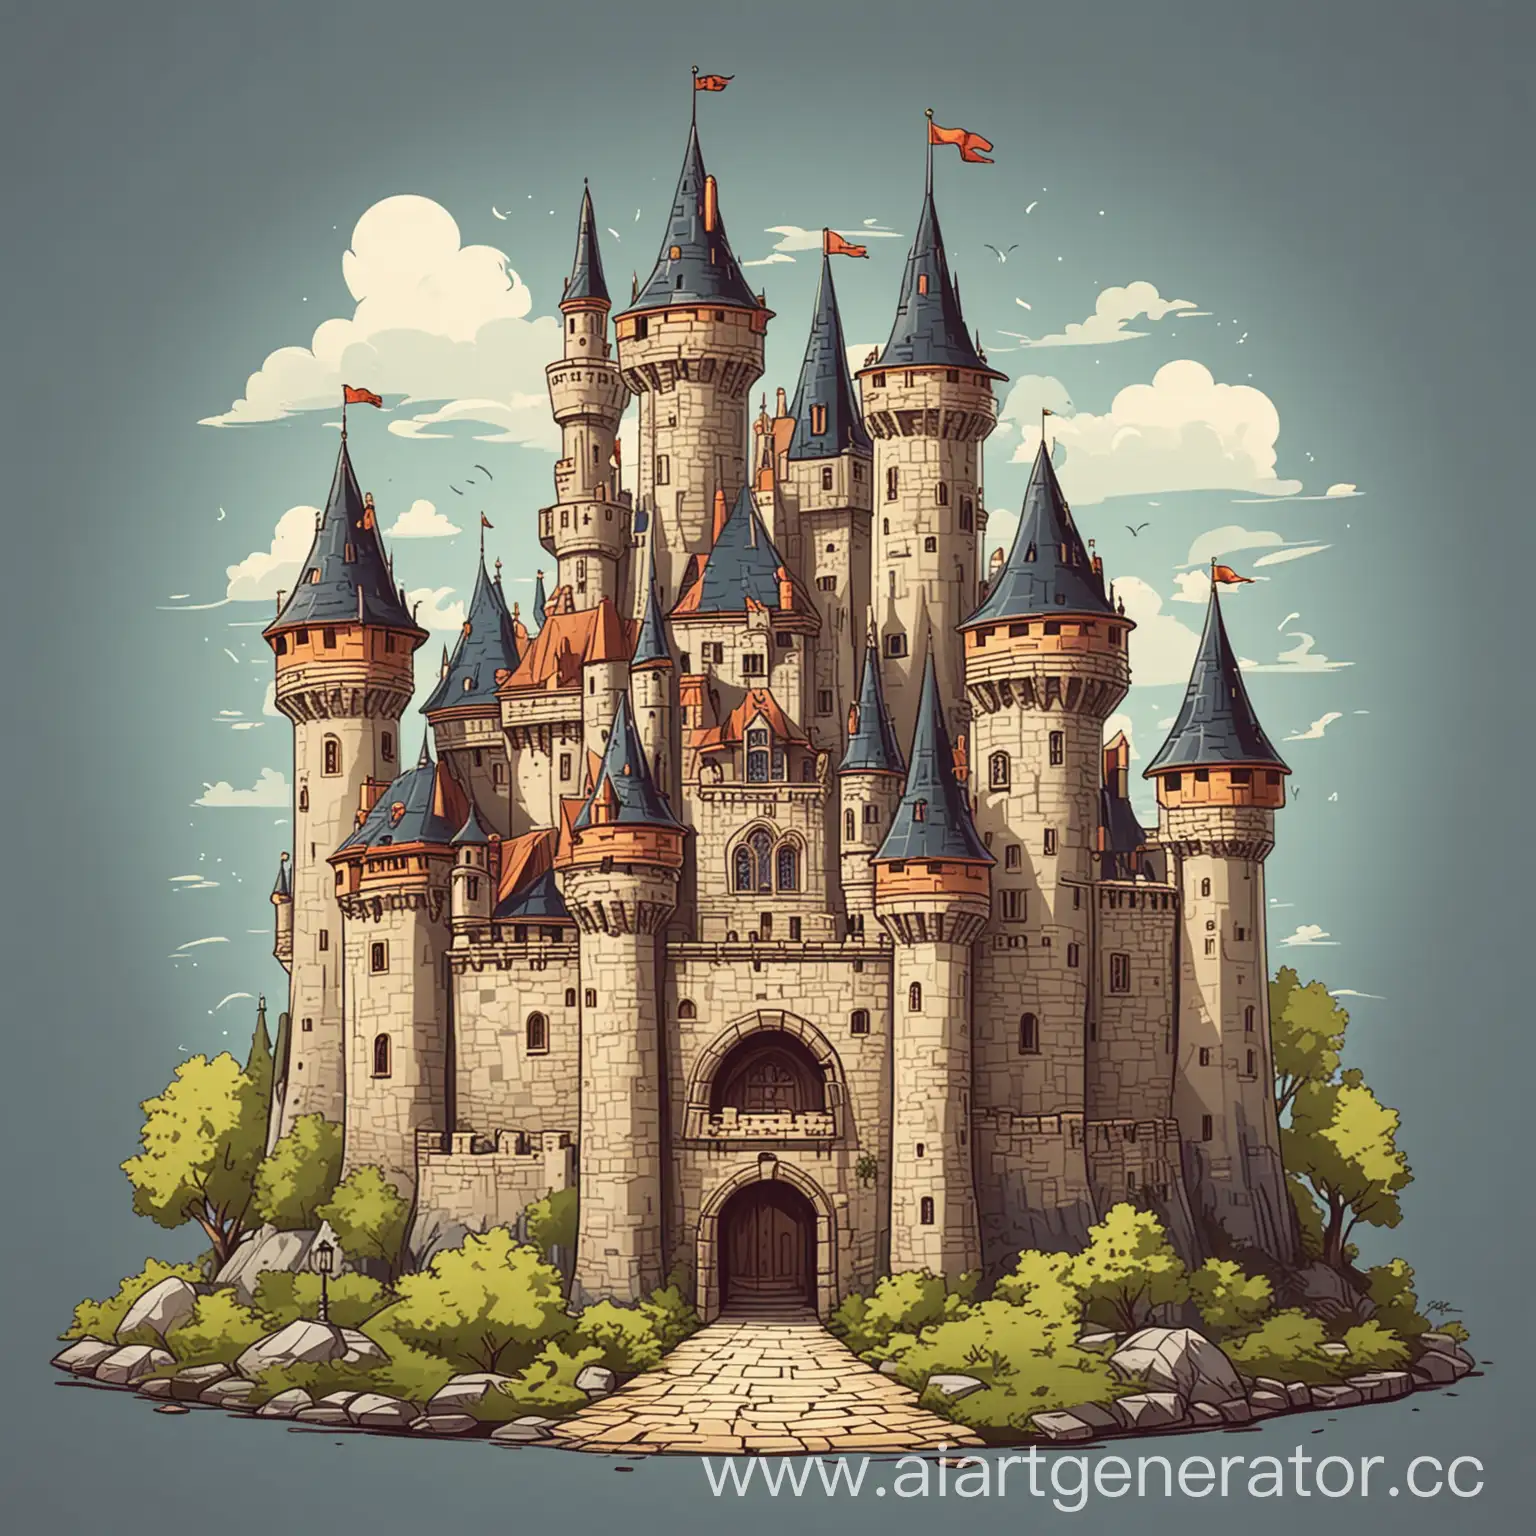 Cartoon-Castle-with-Playful-Characters-and-Vibrant-Colors